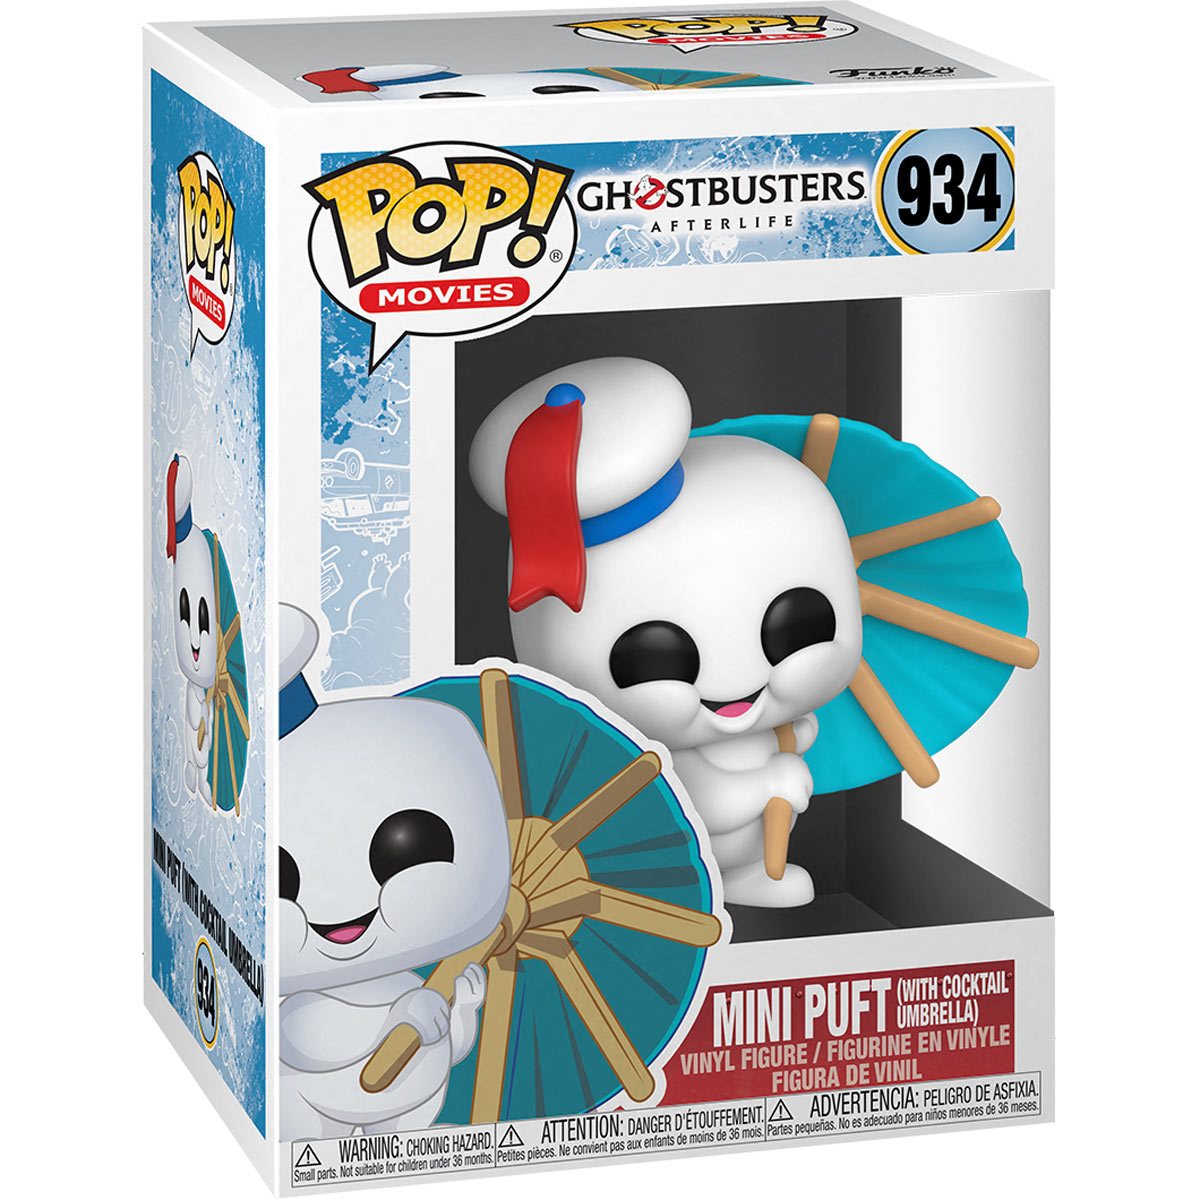 POP! Ghostbuster 3: Afterlife - Mini Puft with Cocktail Umbrella